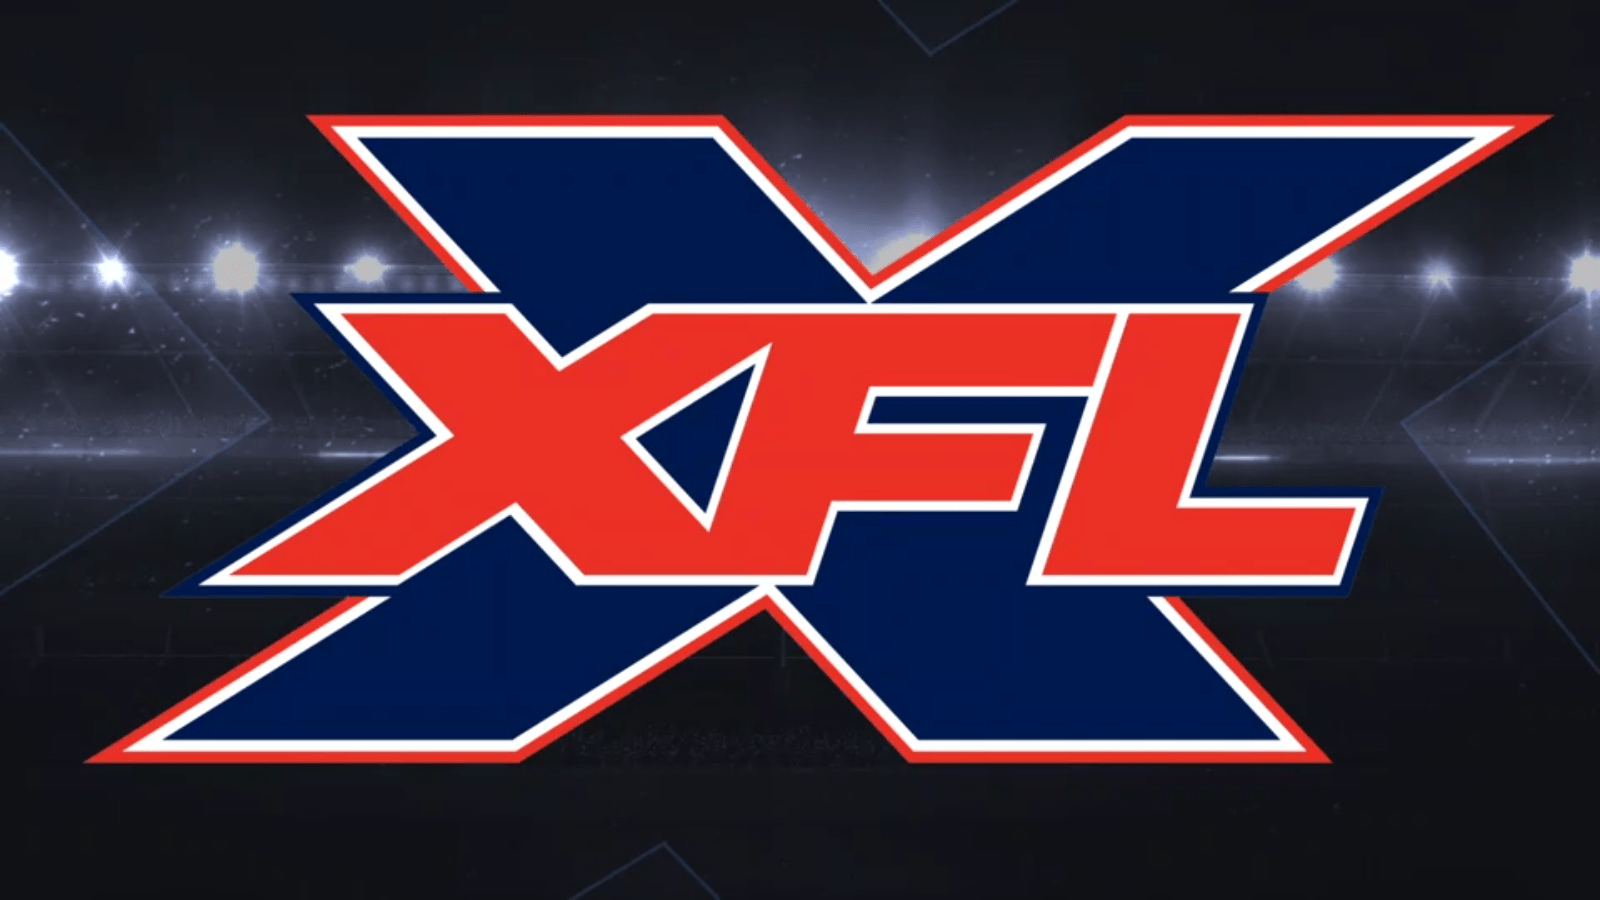  XFL: What I’ve Learned After Two Weeks